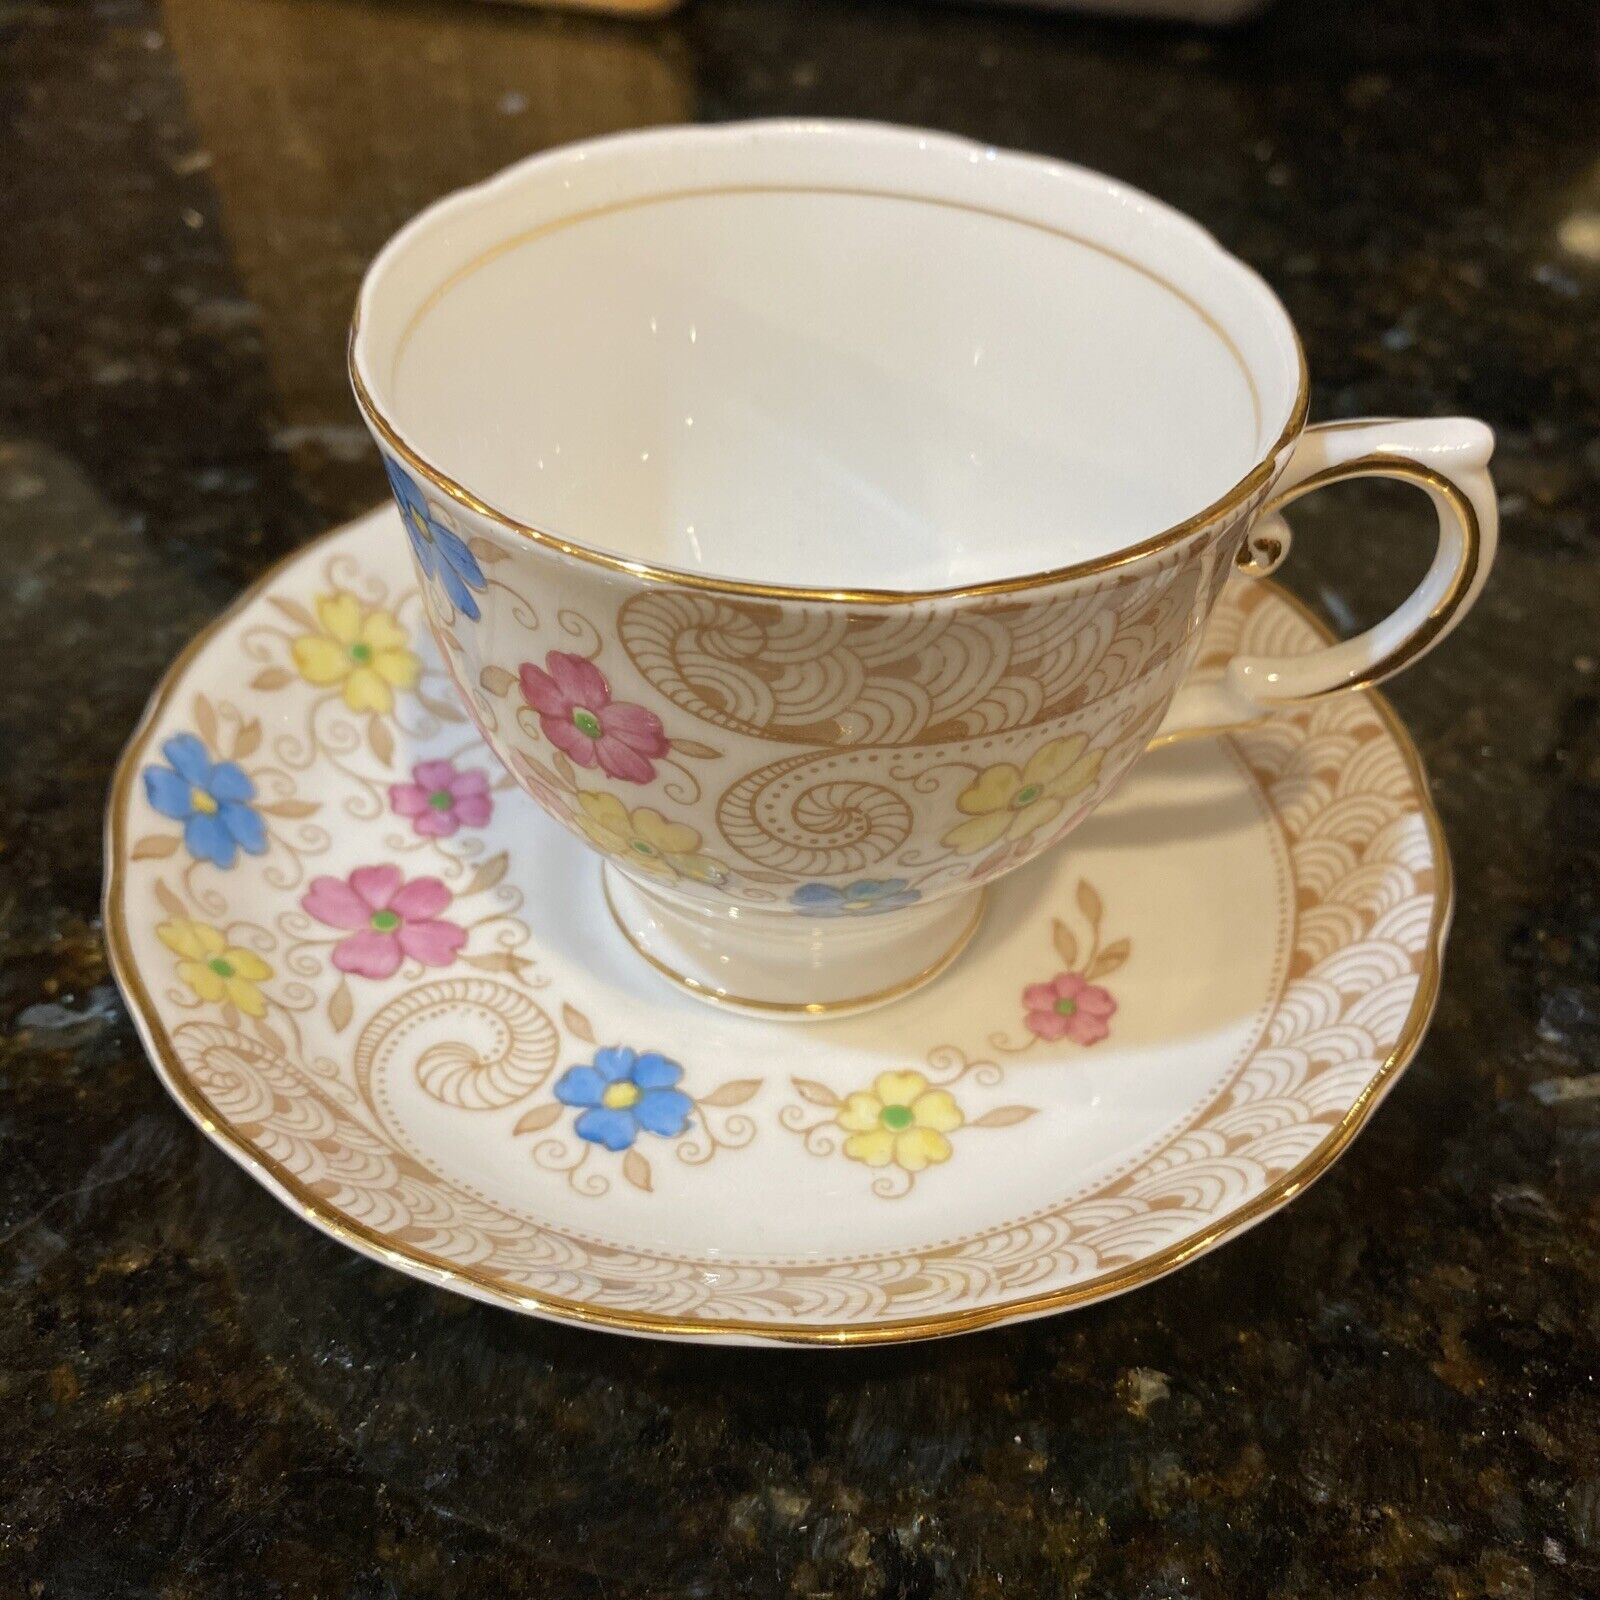 Vintage Tuscan Fine Bone China Tea Cup and Saucer England Floral Gold trim